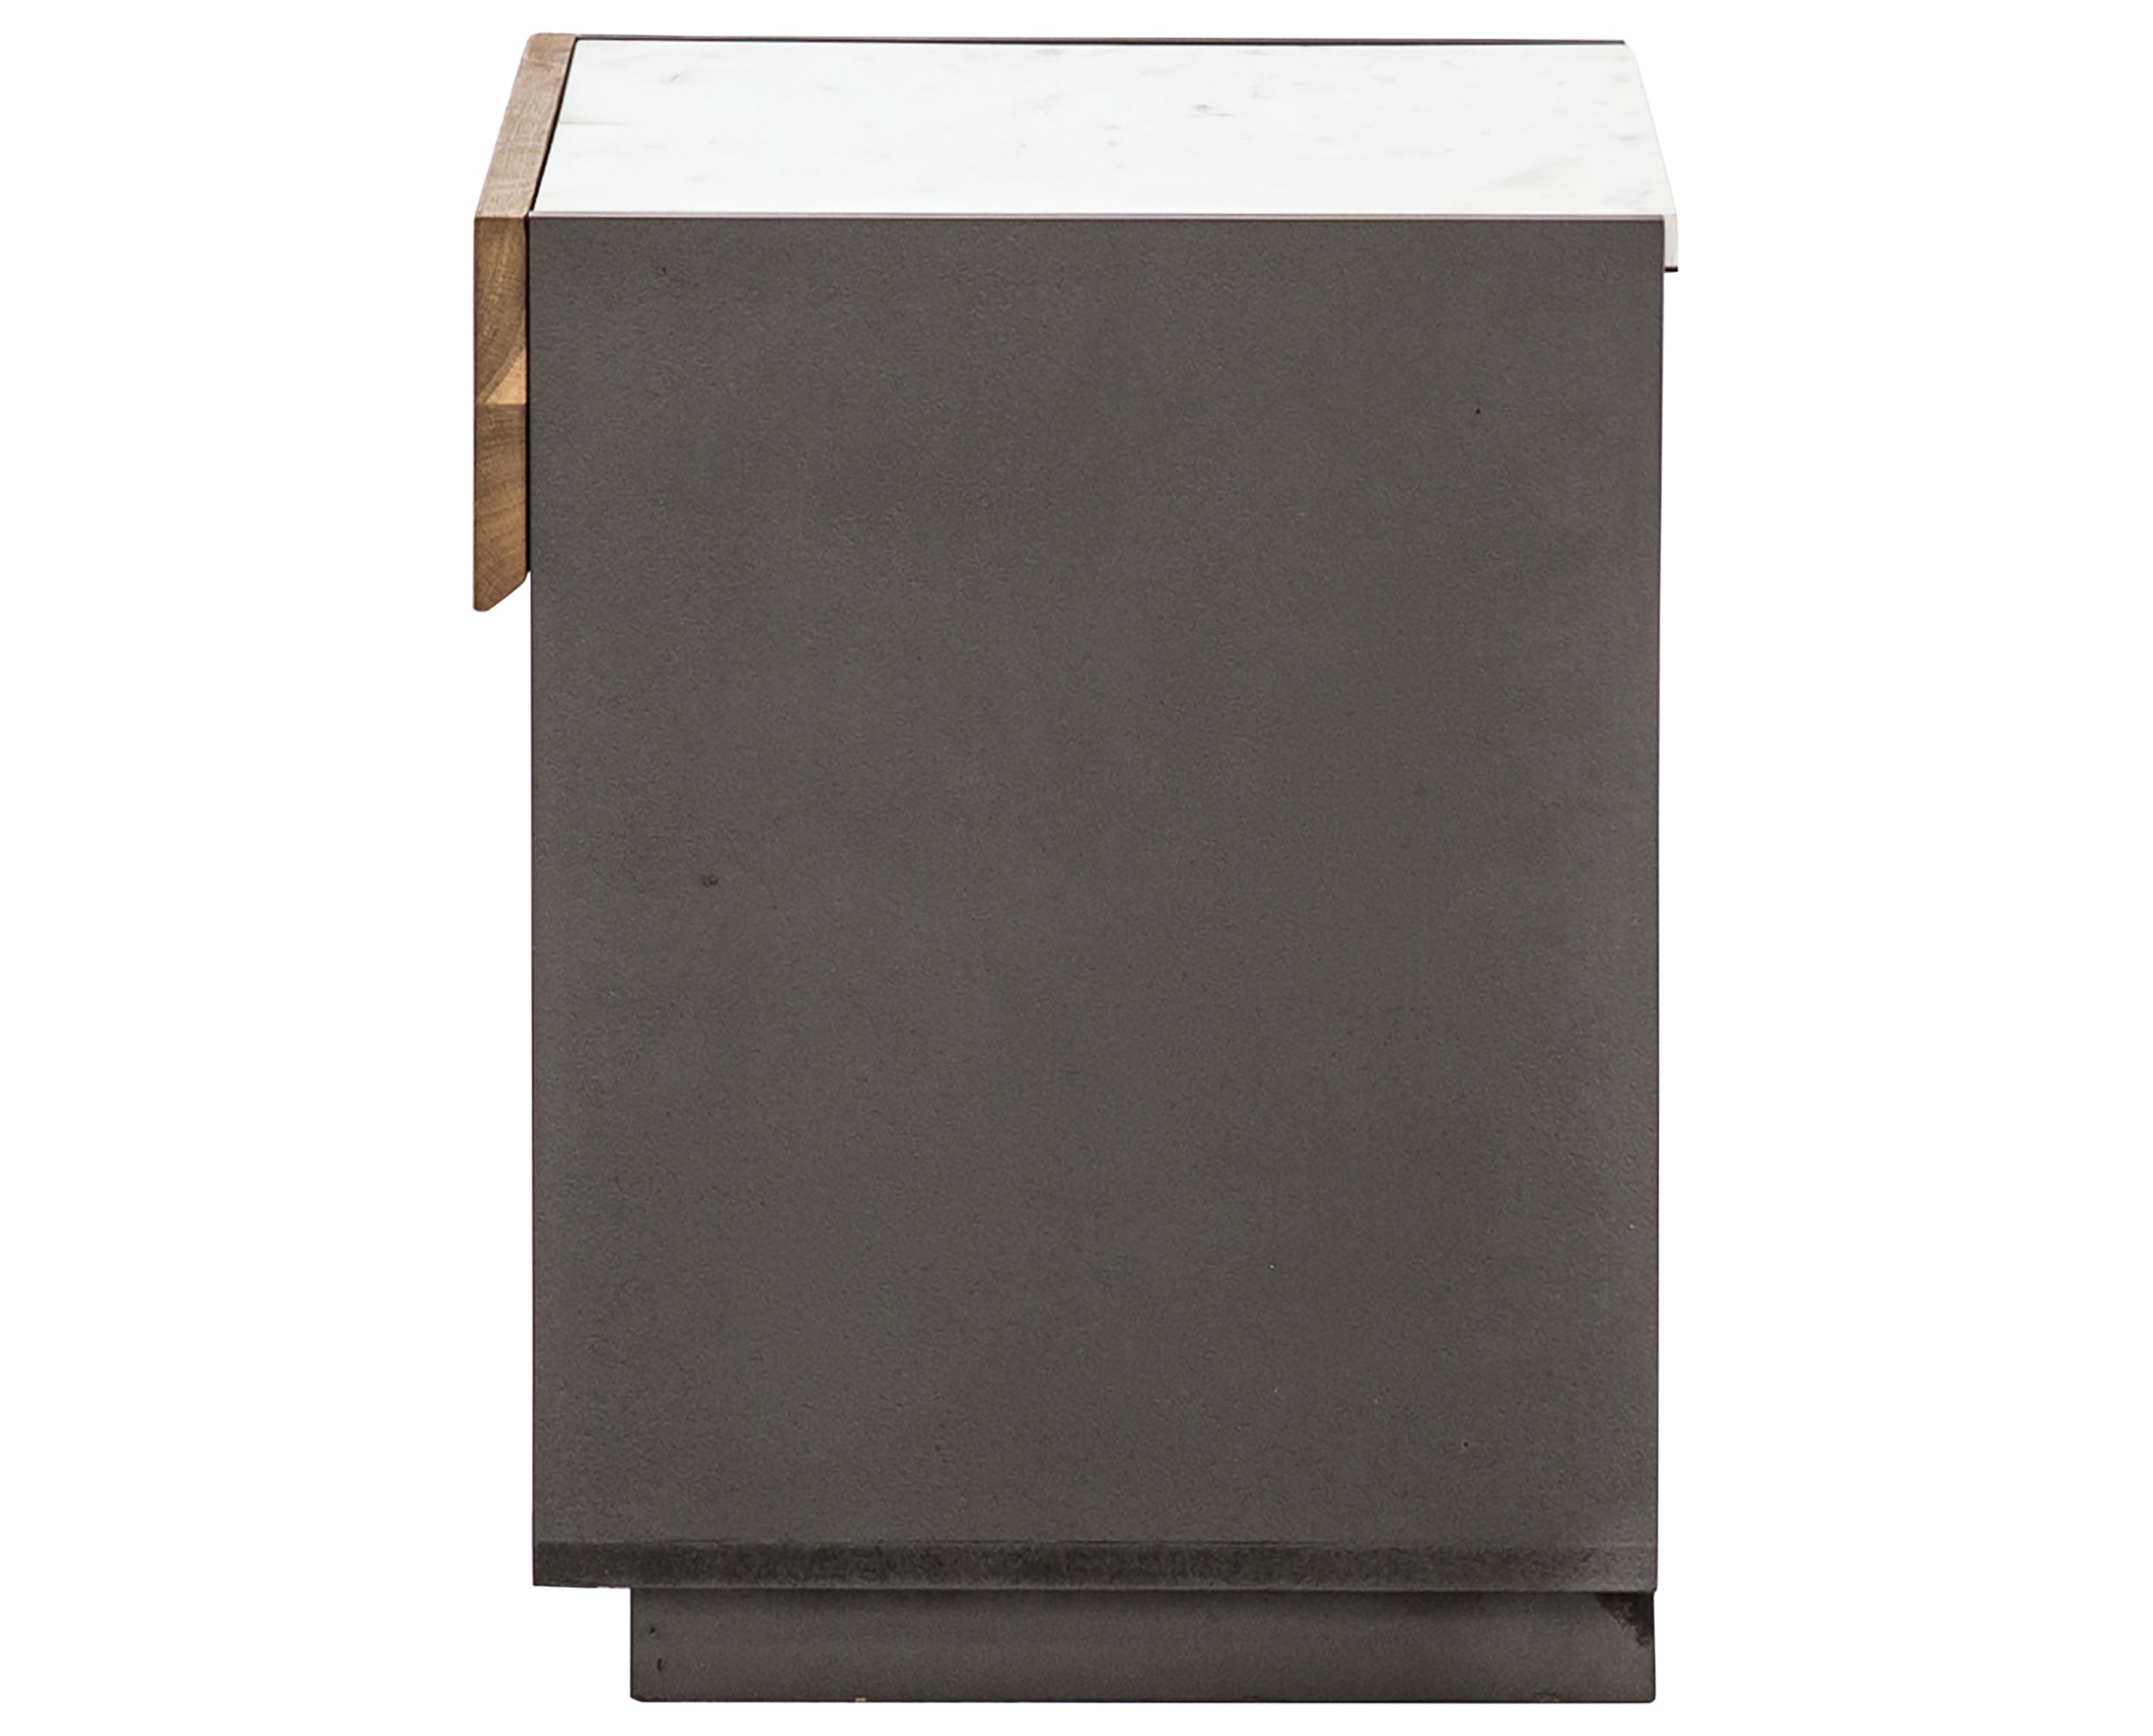 Grey Lacquer Hardwood & White Marble with Dark Smoked Oak | Holland Nightstand | Valley Ridge Furniture